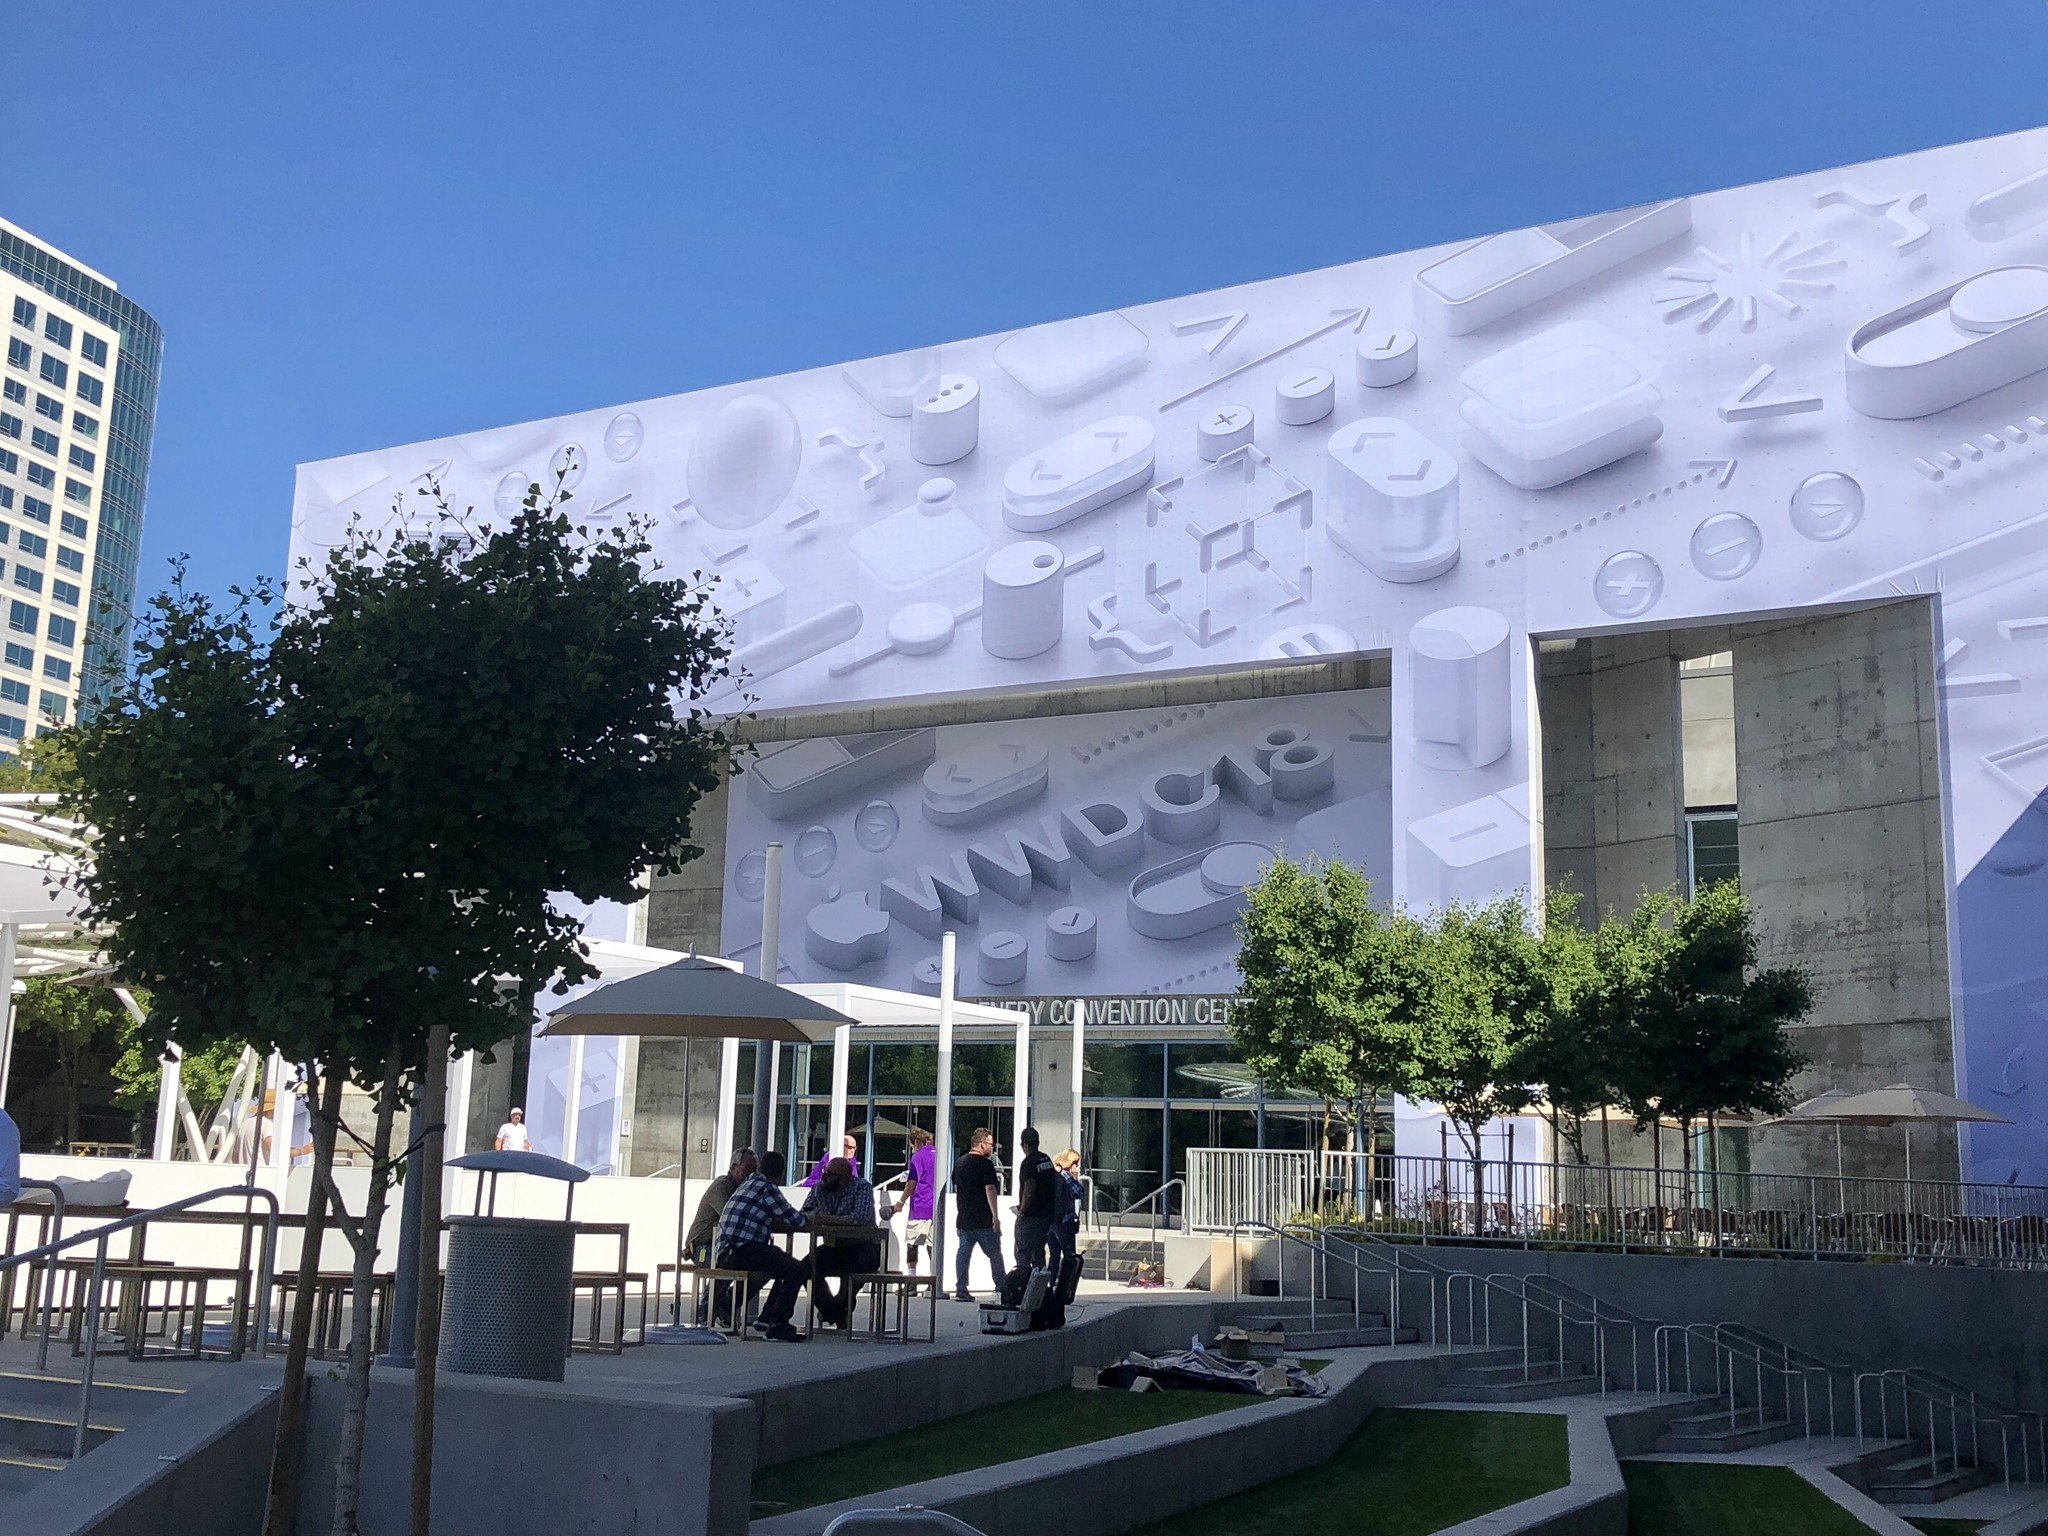 WWDC 2018's most important message comes from scholarship winner John Ciocca